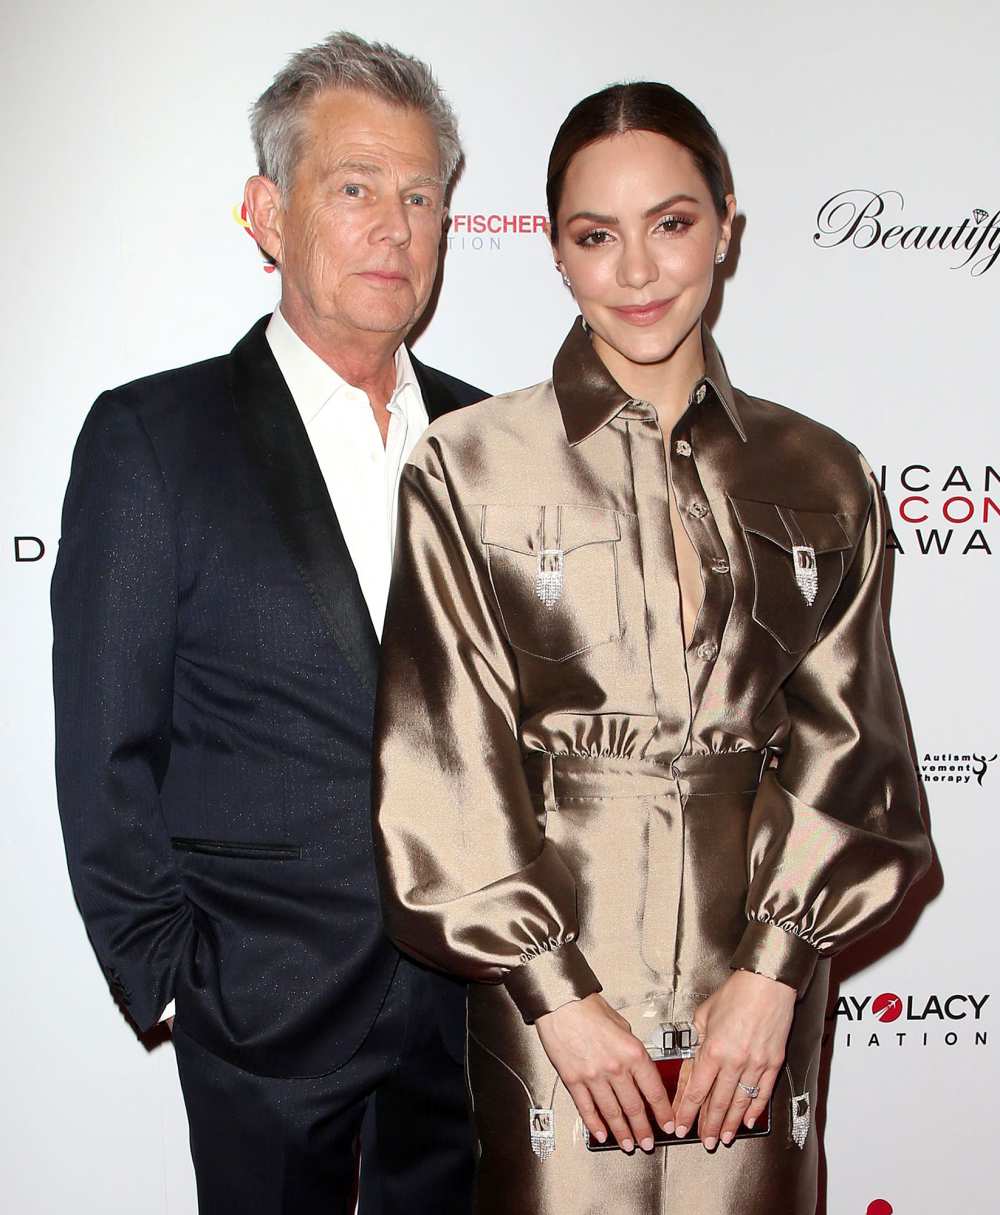 Katharine McPhee Gives Glimpse of Her and David Foster 2-Week-Old Son